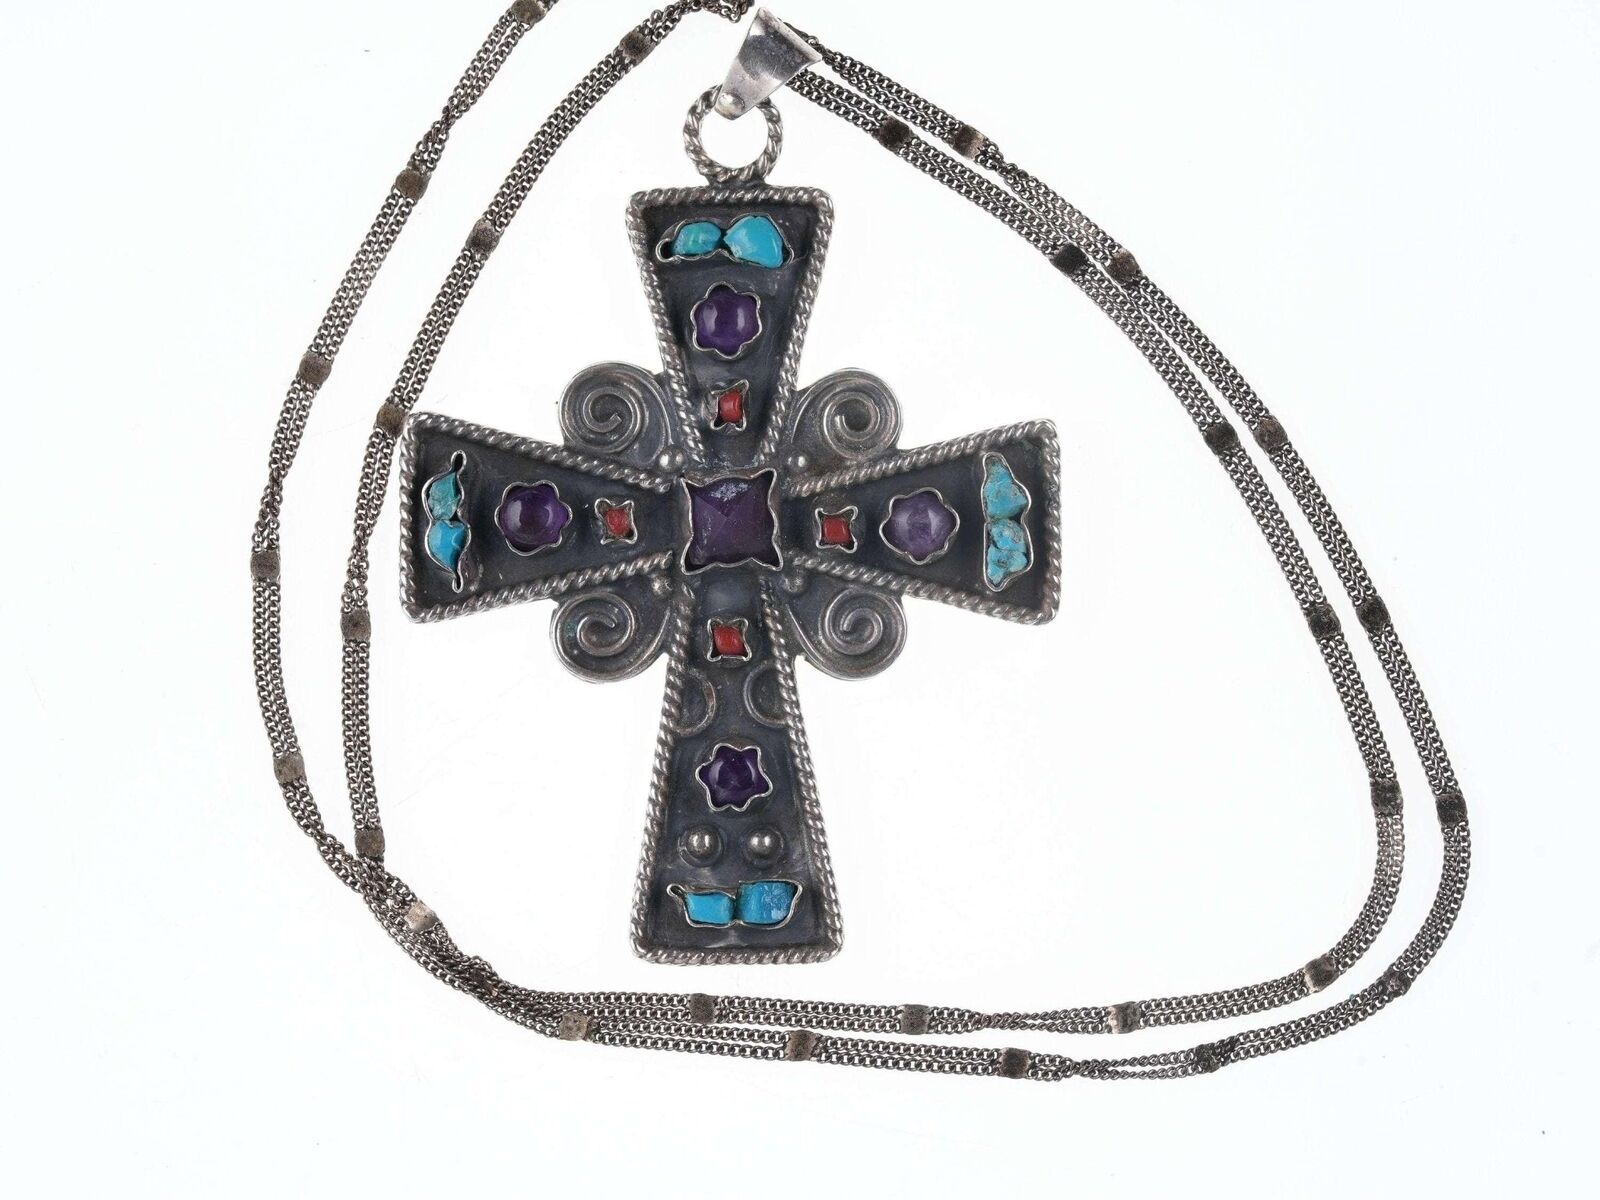 Vintage Matilde Poulat Style Mexican Silver Cross pendant and necklace